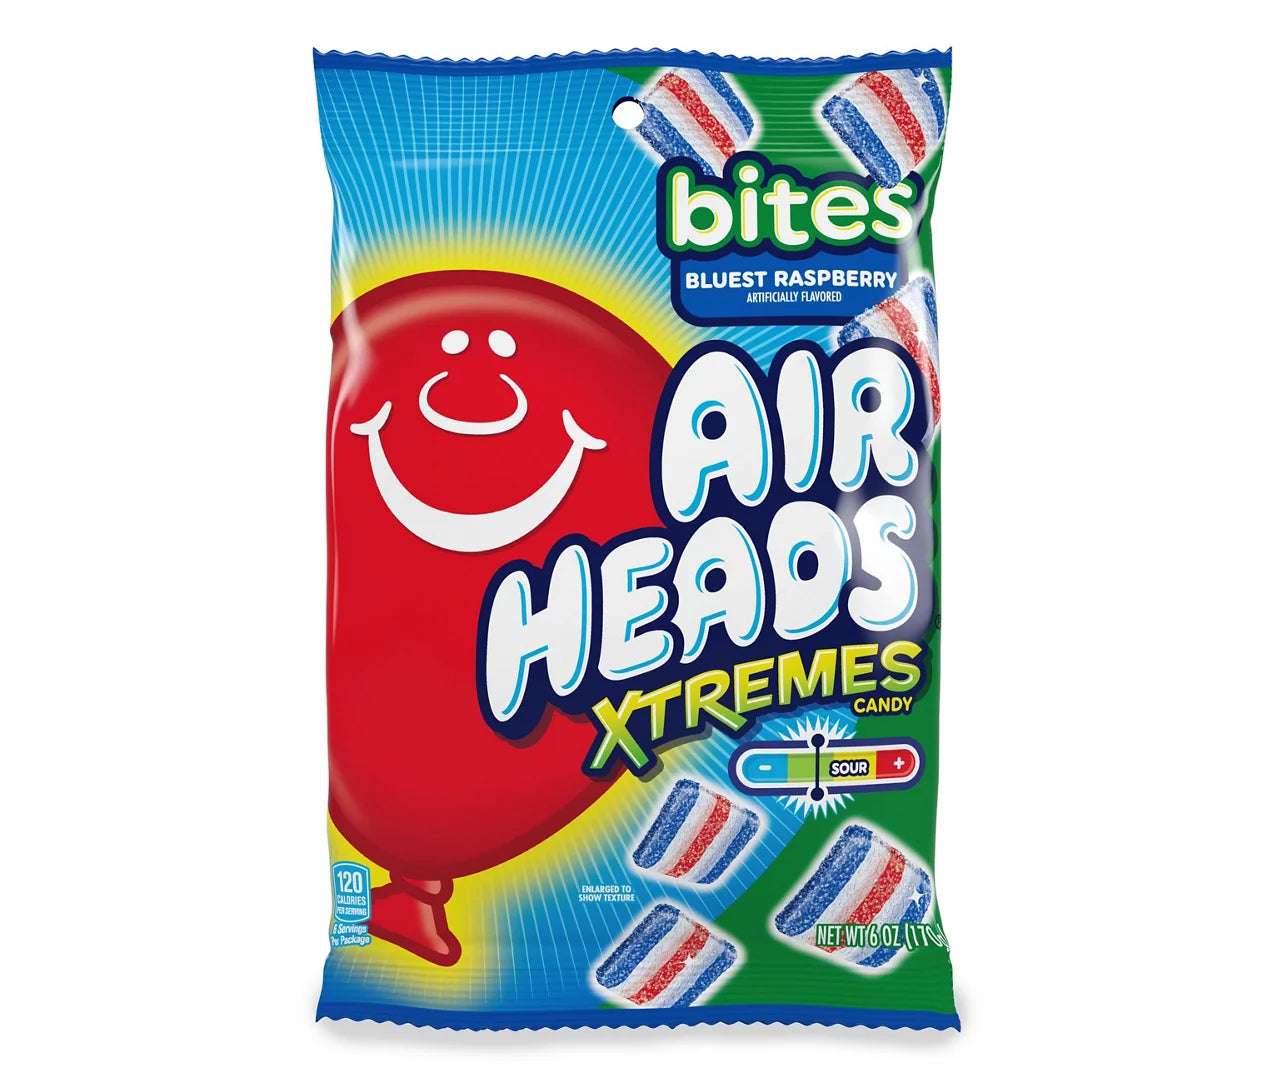 Airheads Xtremes Candy Bluest Raspberry 170g